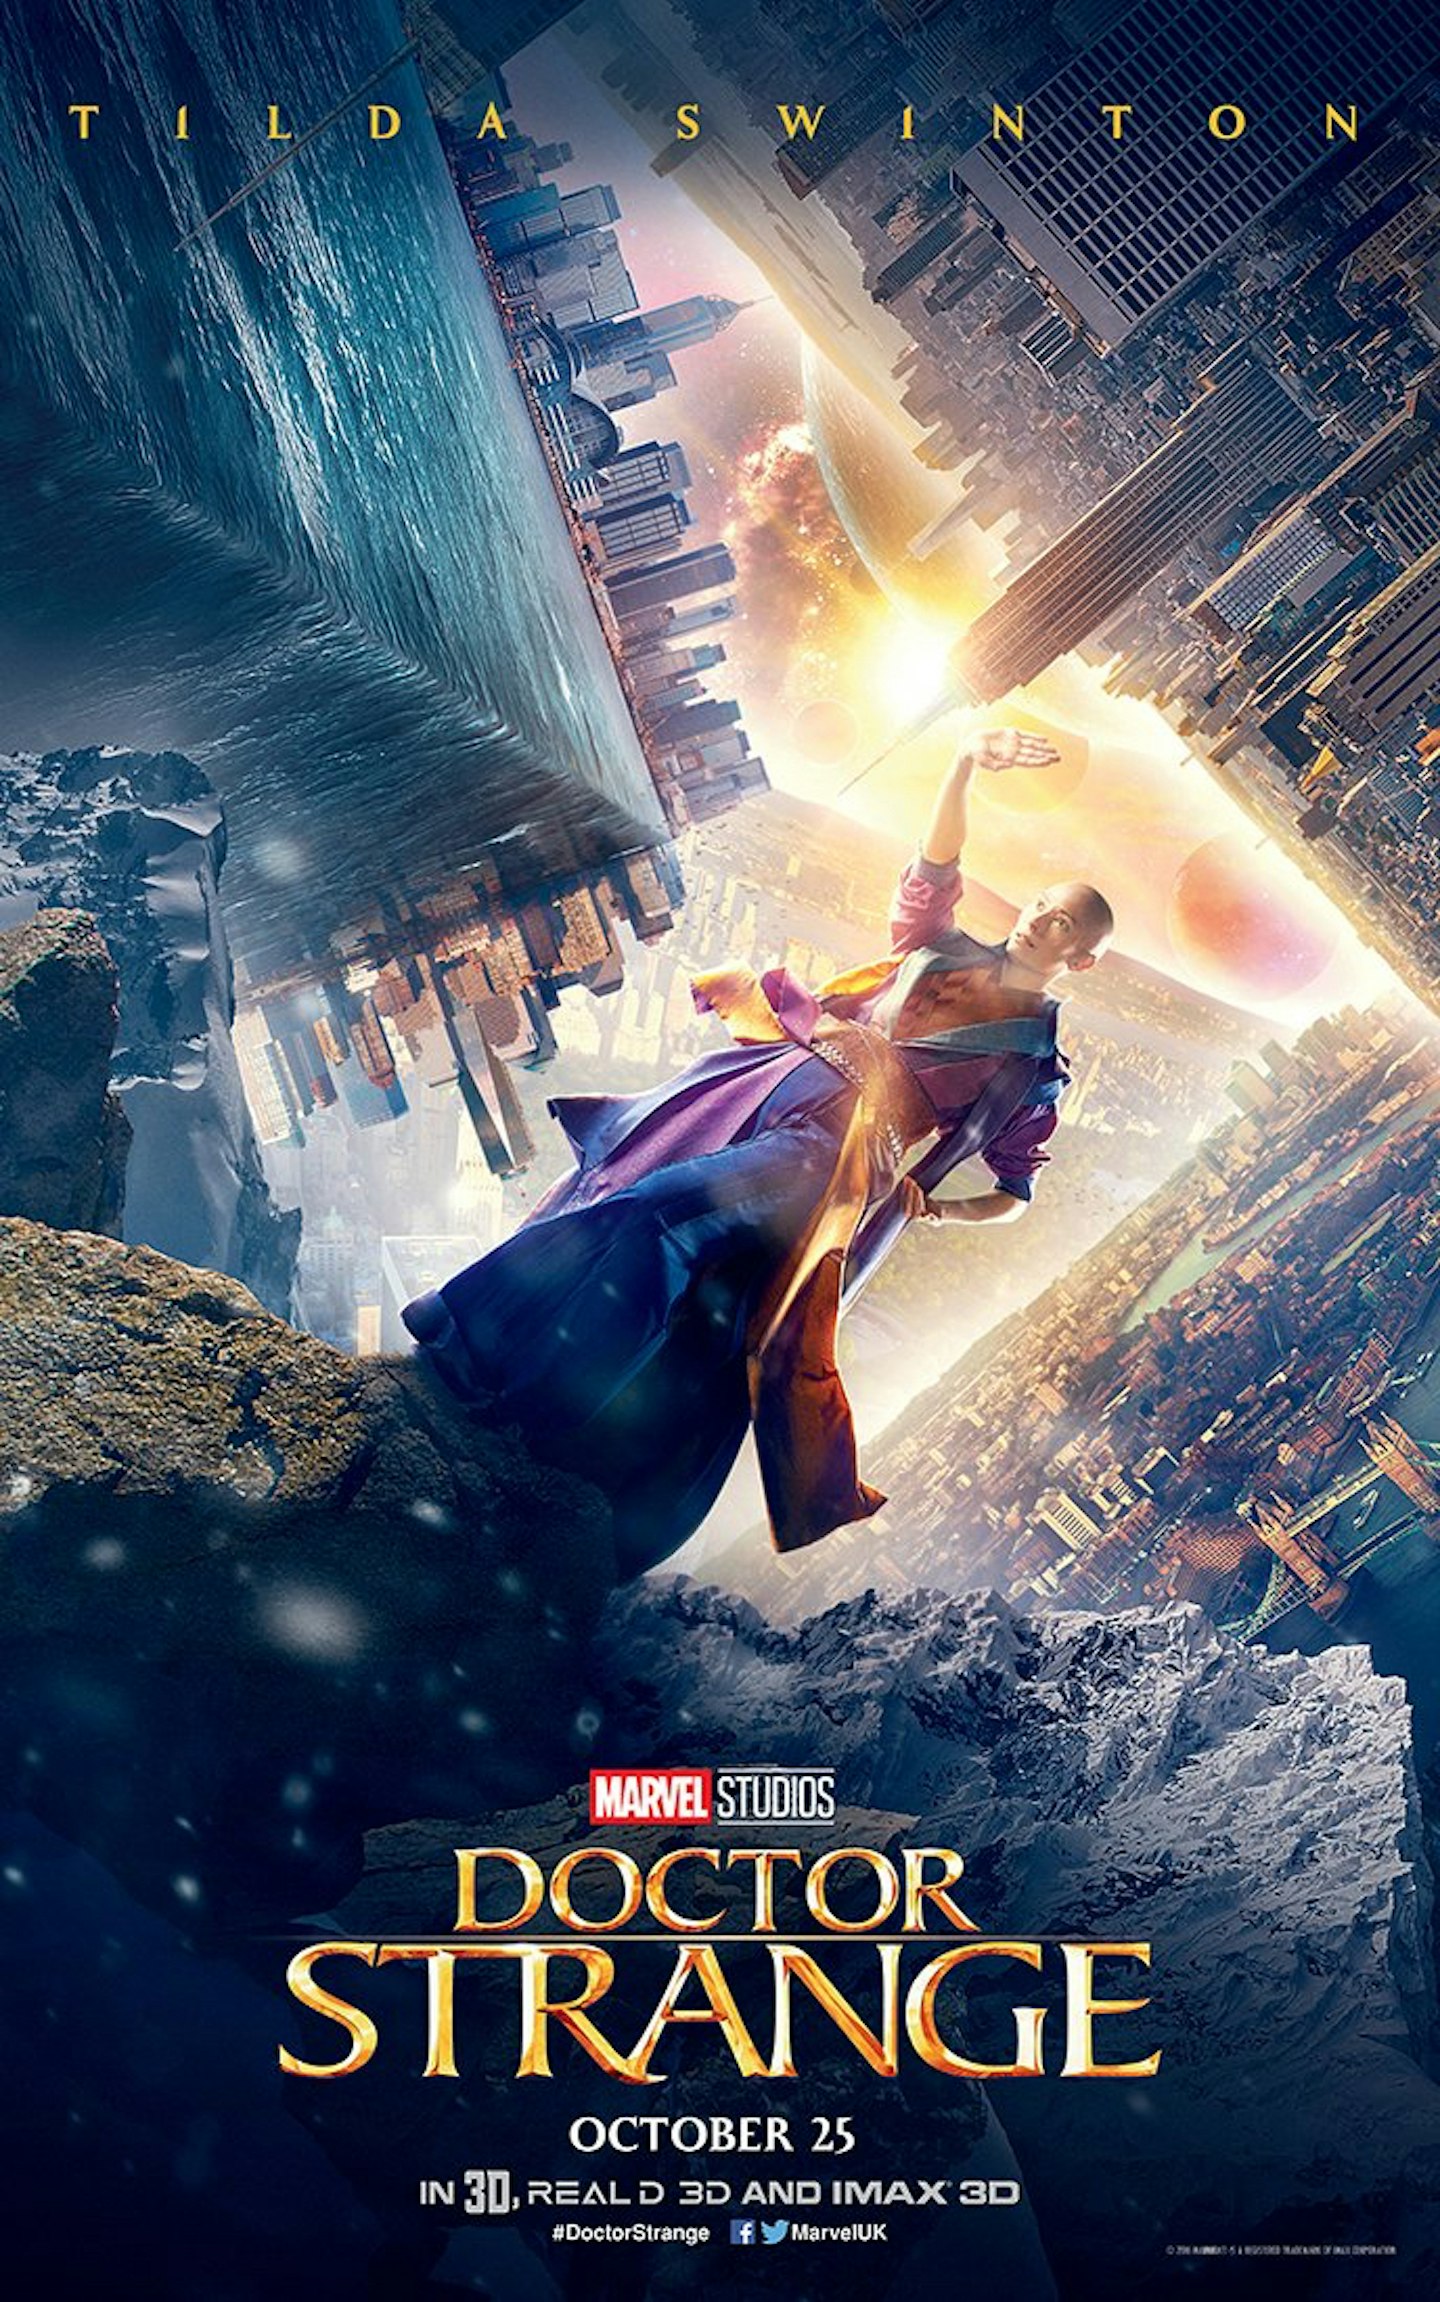 Doctor Strange character posters